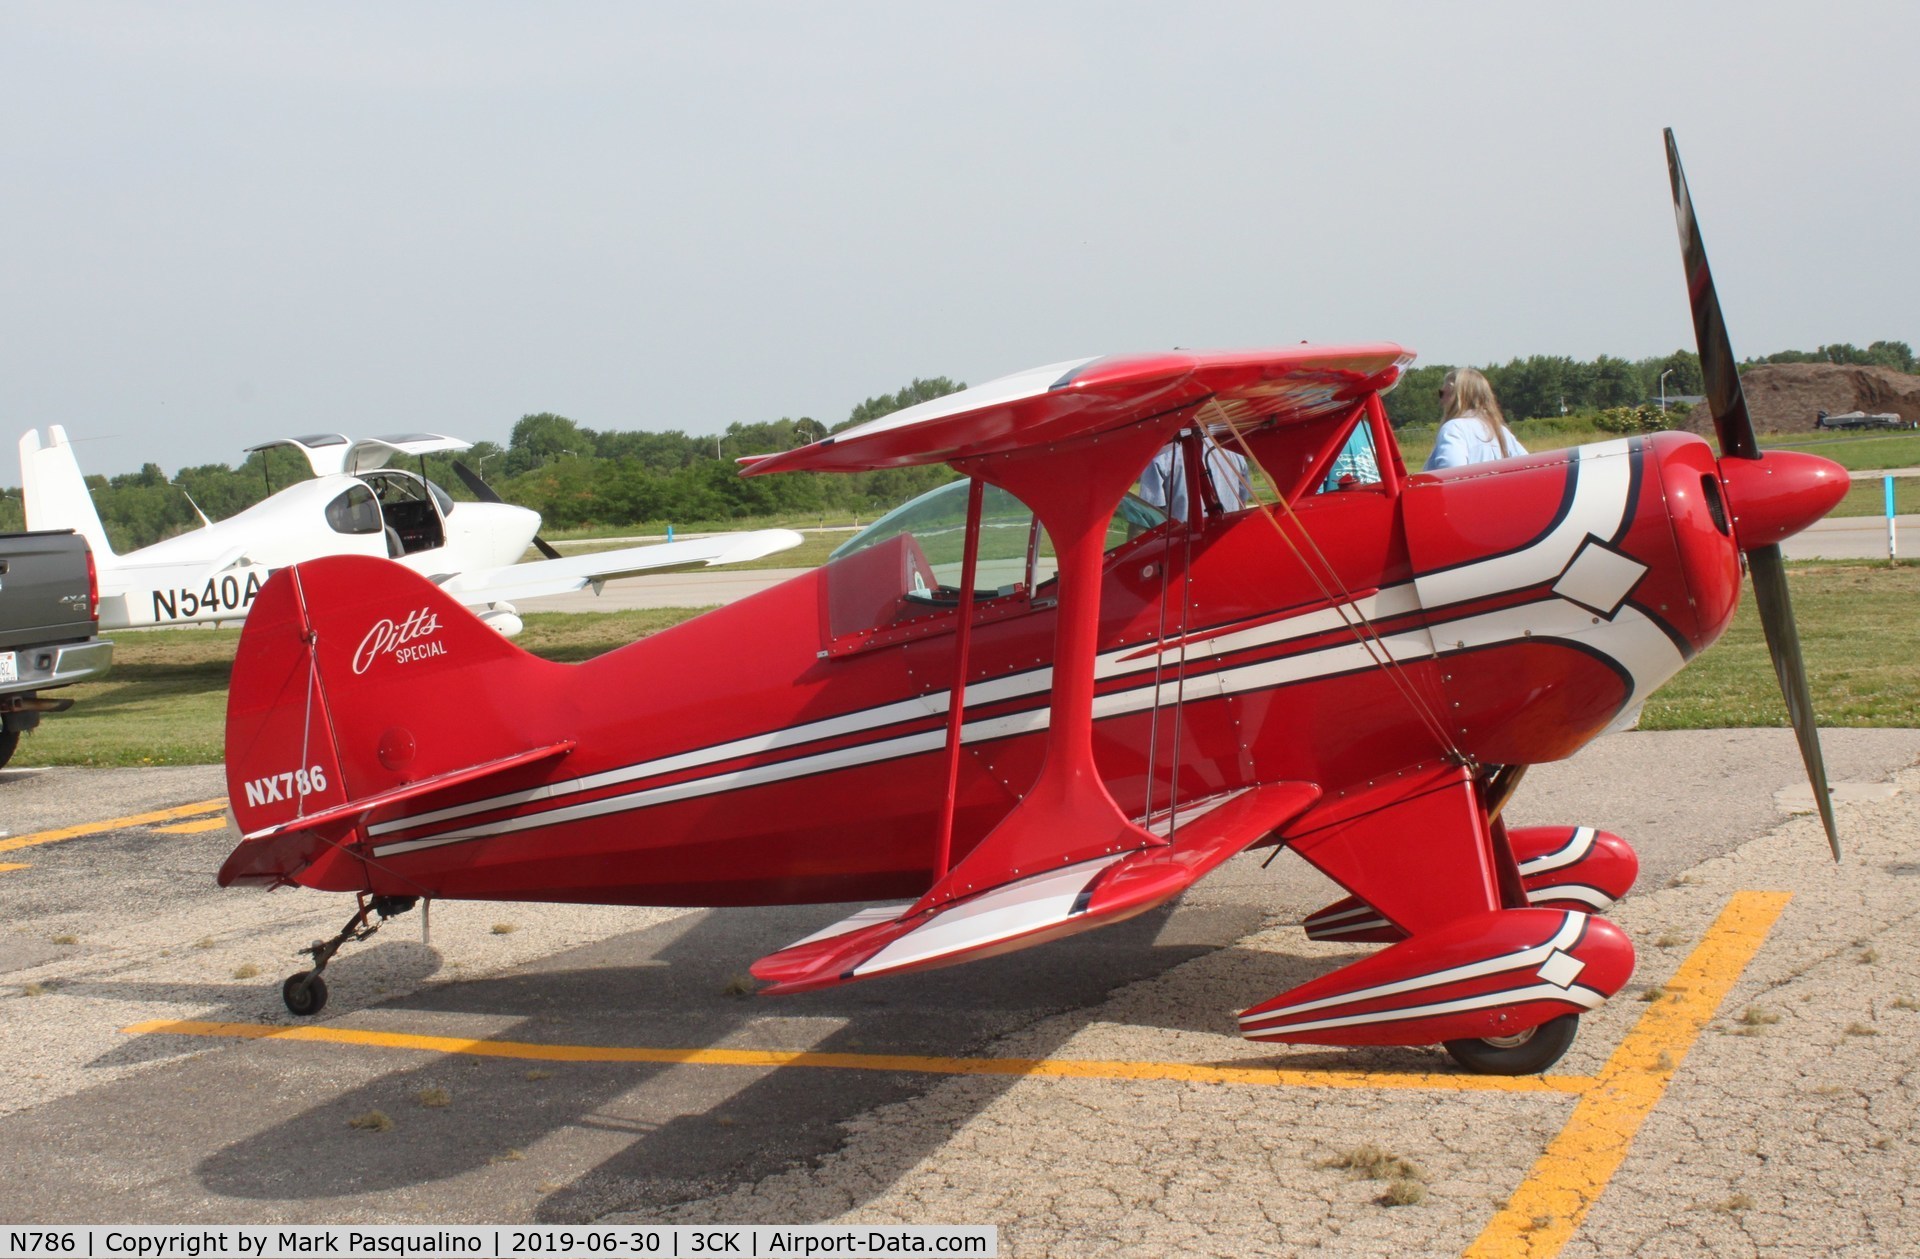 N786, 1983 Pitts S-1E Special C/N 0786, Pitts S-1E